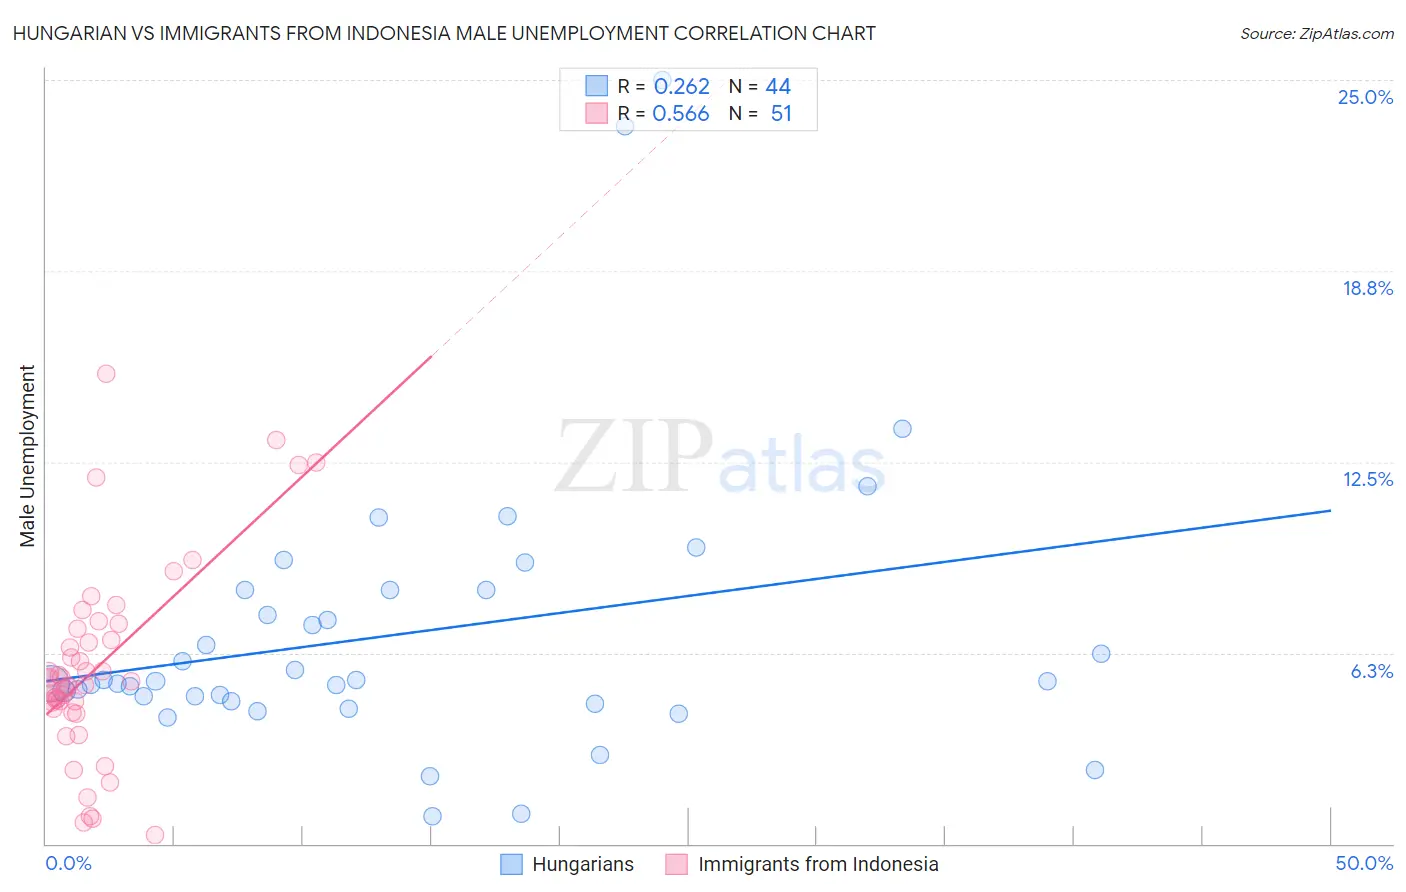 Hungarian vs Immigrants from Indonesia Male Unemployment